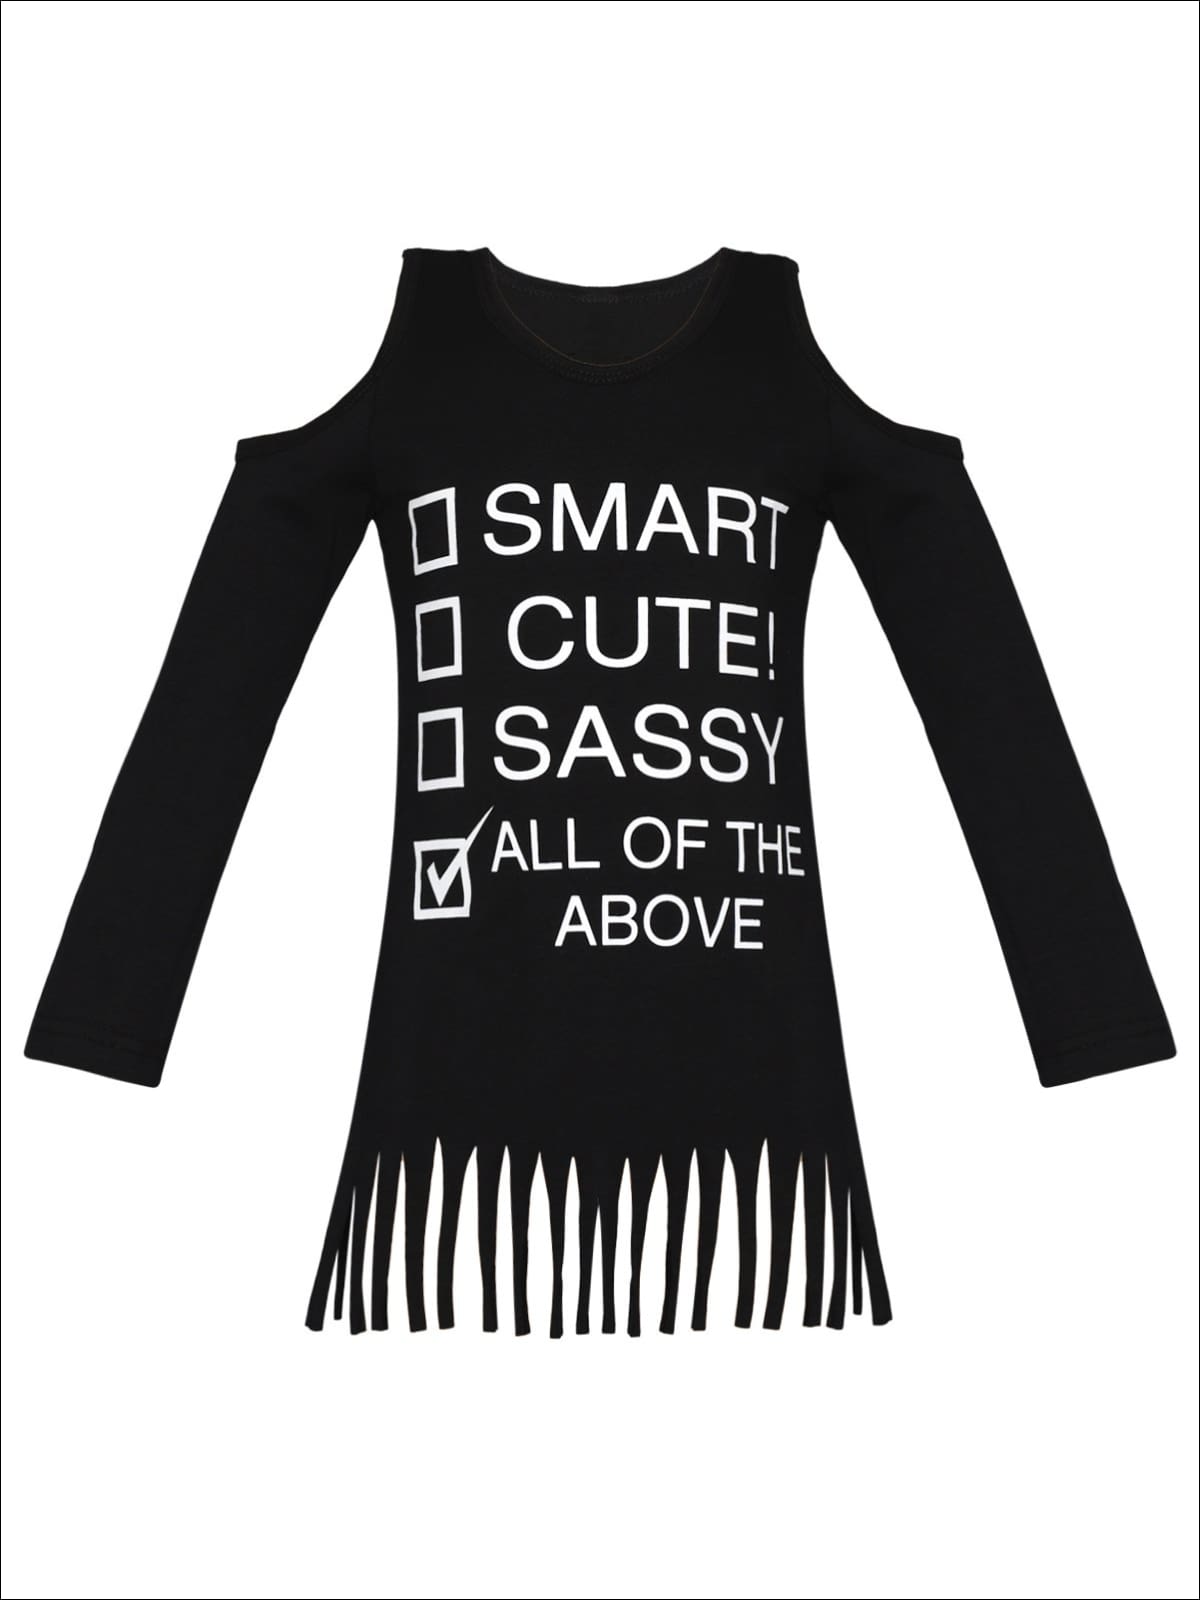 Girls Smart Cute Sassy All of the Above Checklist Cold Shoulder Fringe Graphic Statement Top - Black / 2T/3T - Girls Fall Top